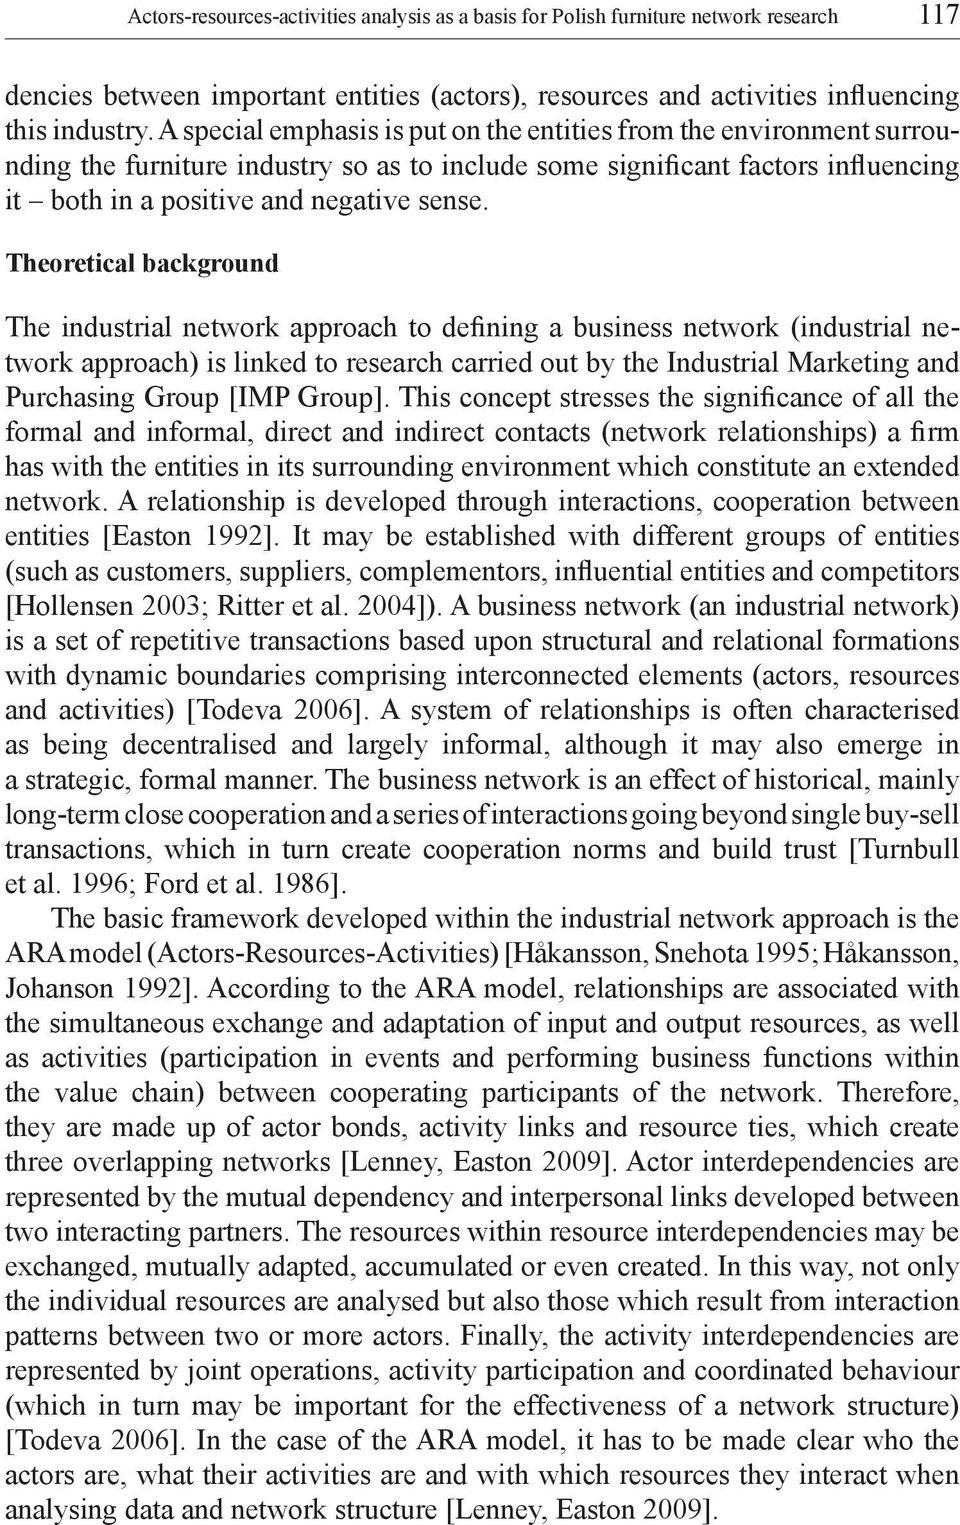 Theoretical background The industrial network approach to defining a business network (industrial network approach) is linked to research carried out by the Industrial Marketing and Purchasing Group